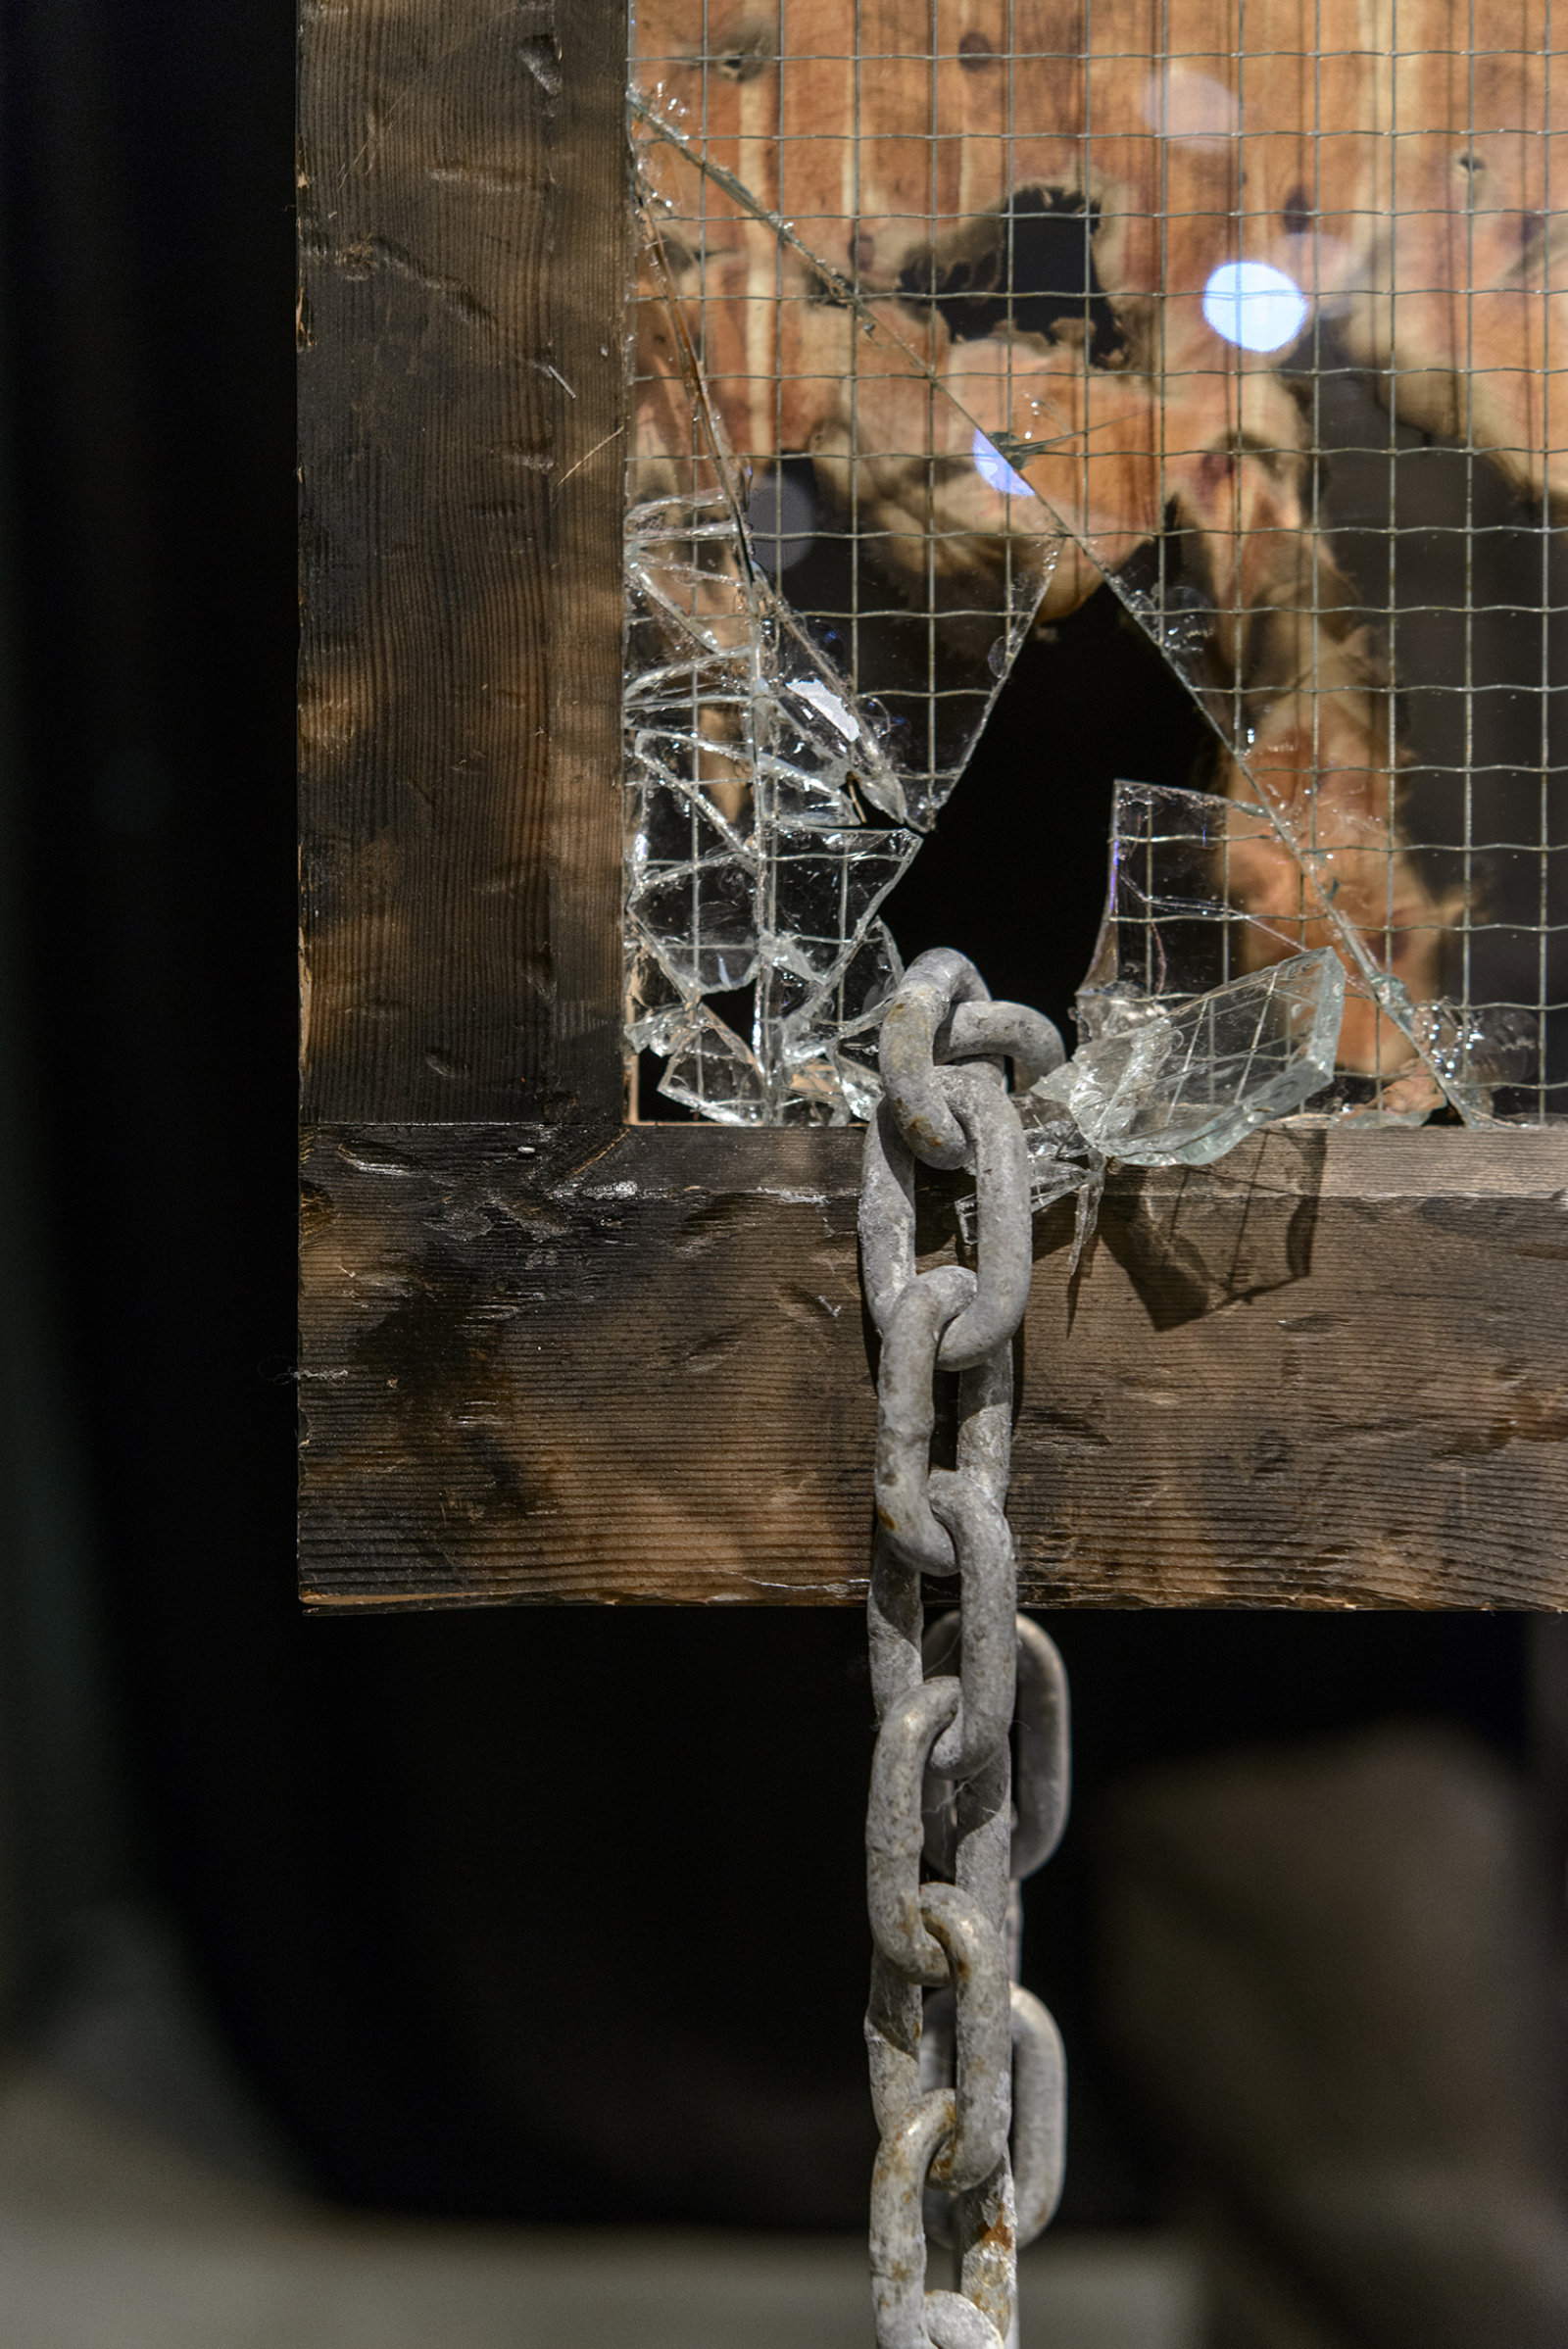 Kasper Feyrer, Chained/Charred, 2013, burnt fabric, corroded chain, security glass, hand painted sign, charcoaled wood frame, dimensions variable. Installation view, The Intellection of Lady Spider House, Art Gallery of Alberta, 2013.